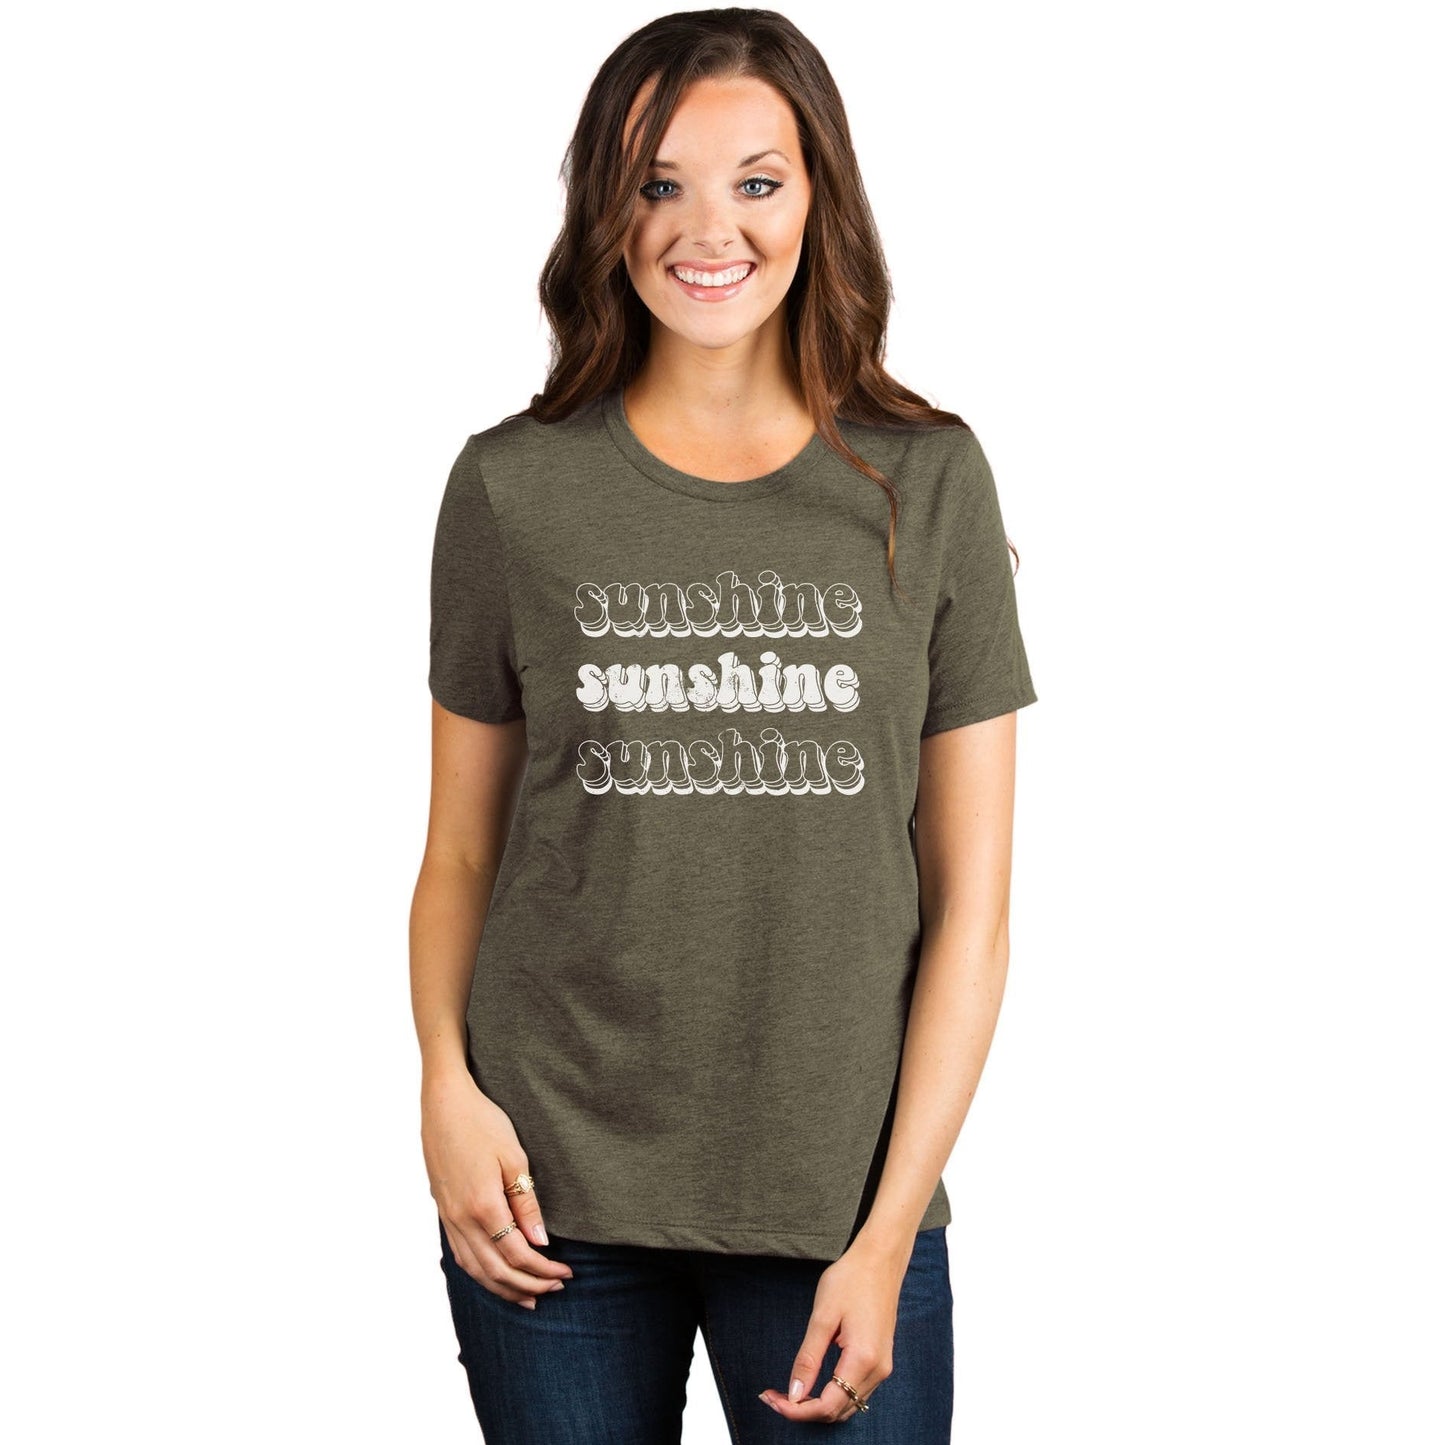 Sunshine - Stories You Can Wear